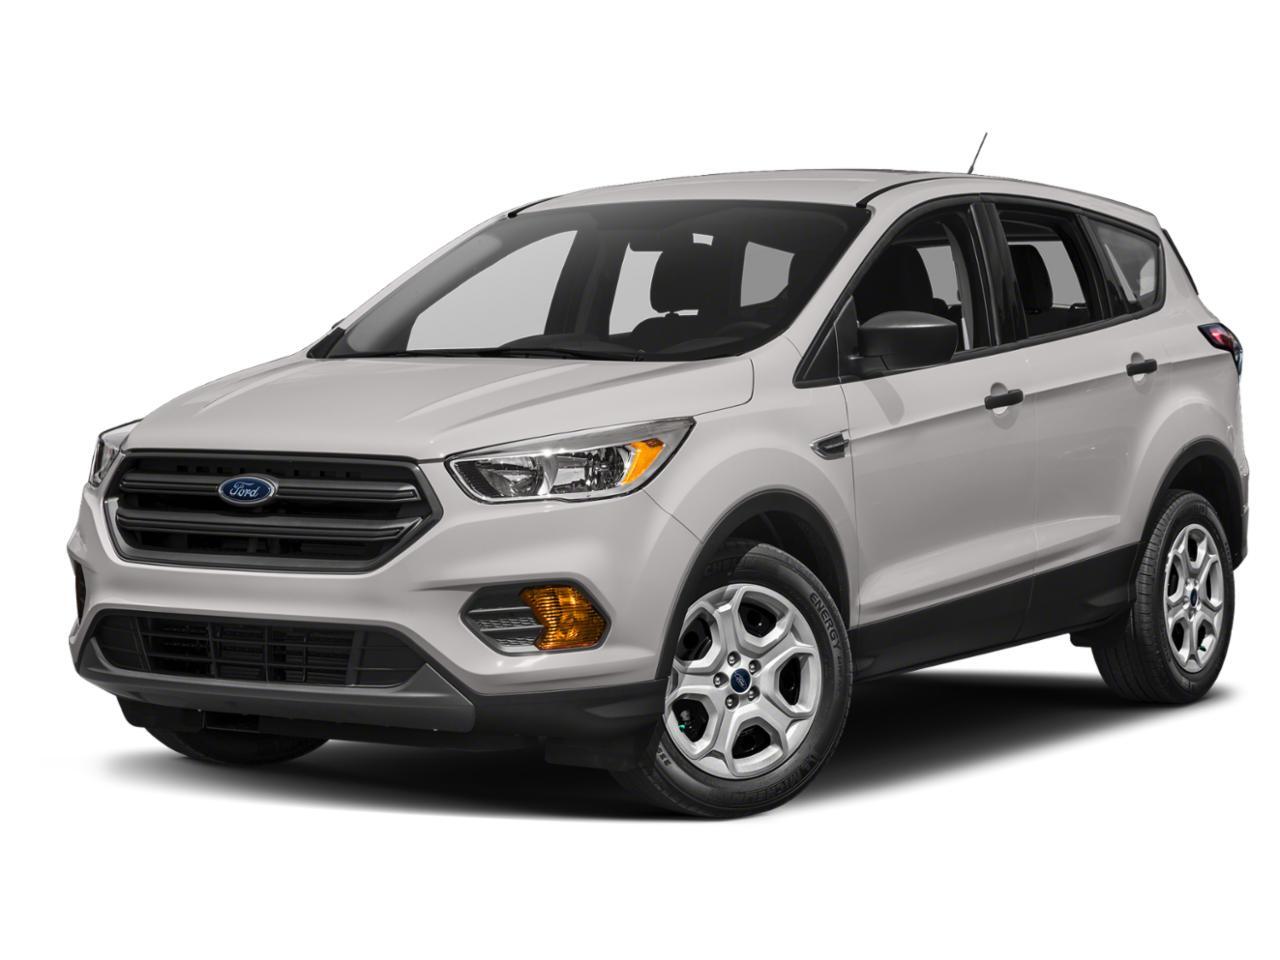 2019 Ford Escape SEL - 4WD | LEATHER INTERIOR | HEATED SEATS |LOCAL